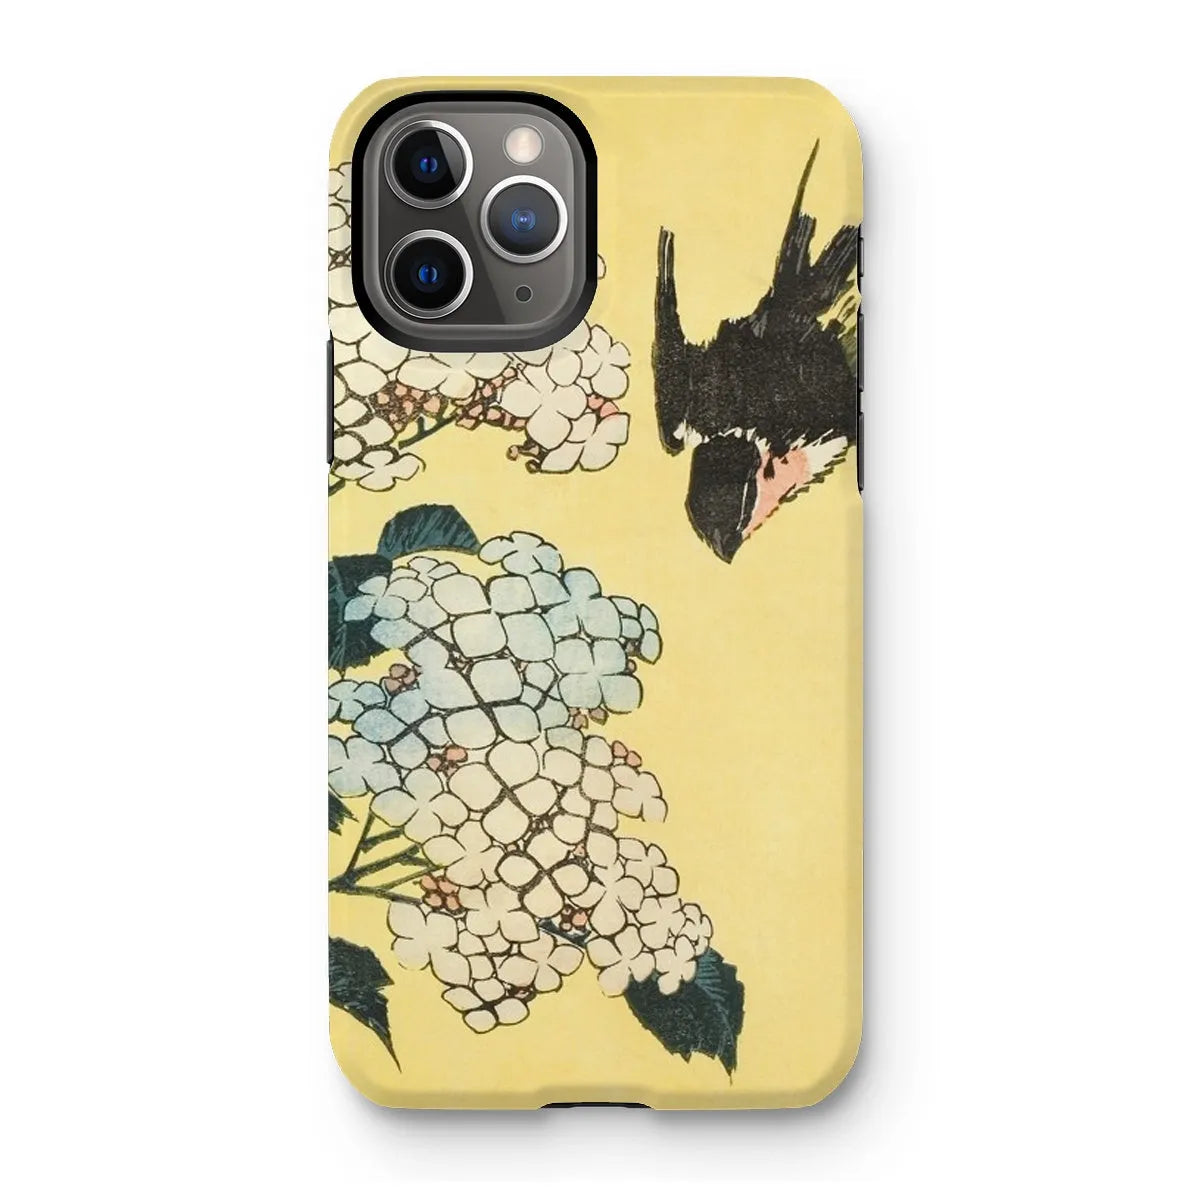 Hydrangea And Swallow - Japanese Art Phone Case - Hokusai - Iphone 11 Pro / Matte - Mobile Phone Cases - Aesthetic Art